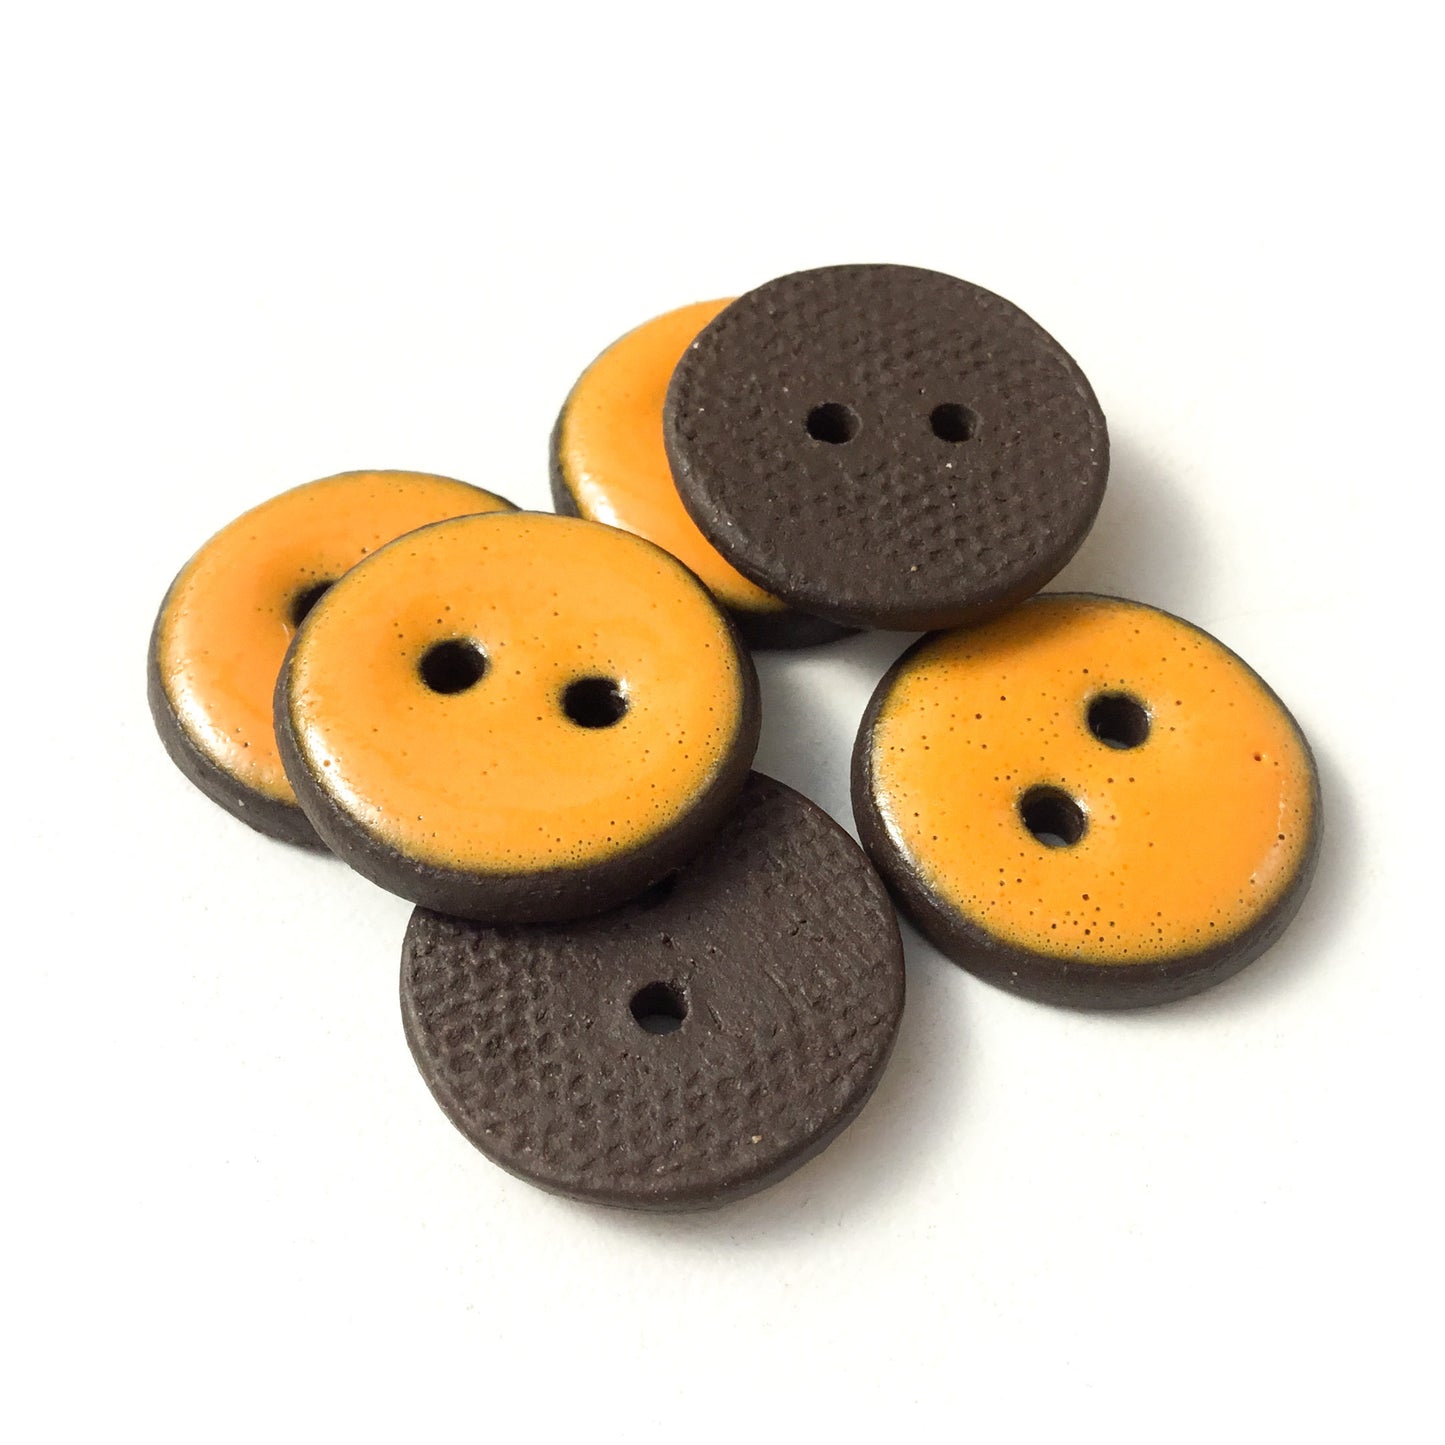 Bright Orange Ceramic Buttons - Orange Clay Buttons - 3/4" - 6 Pack